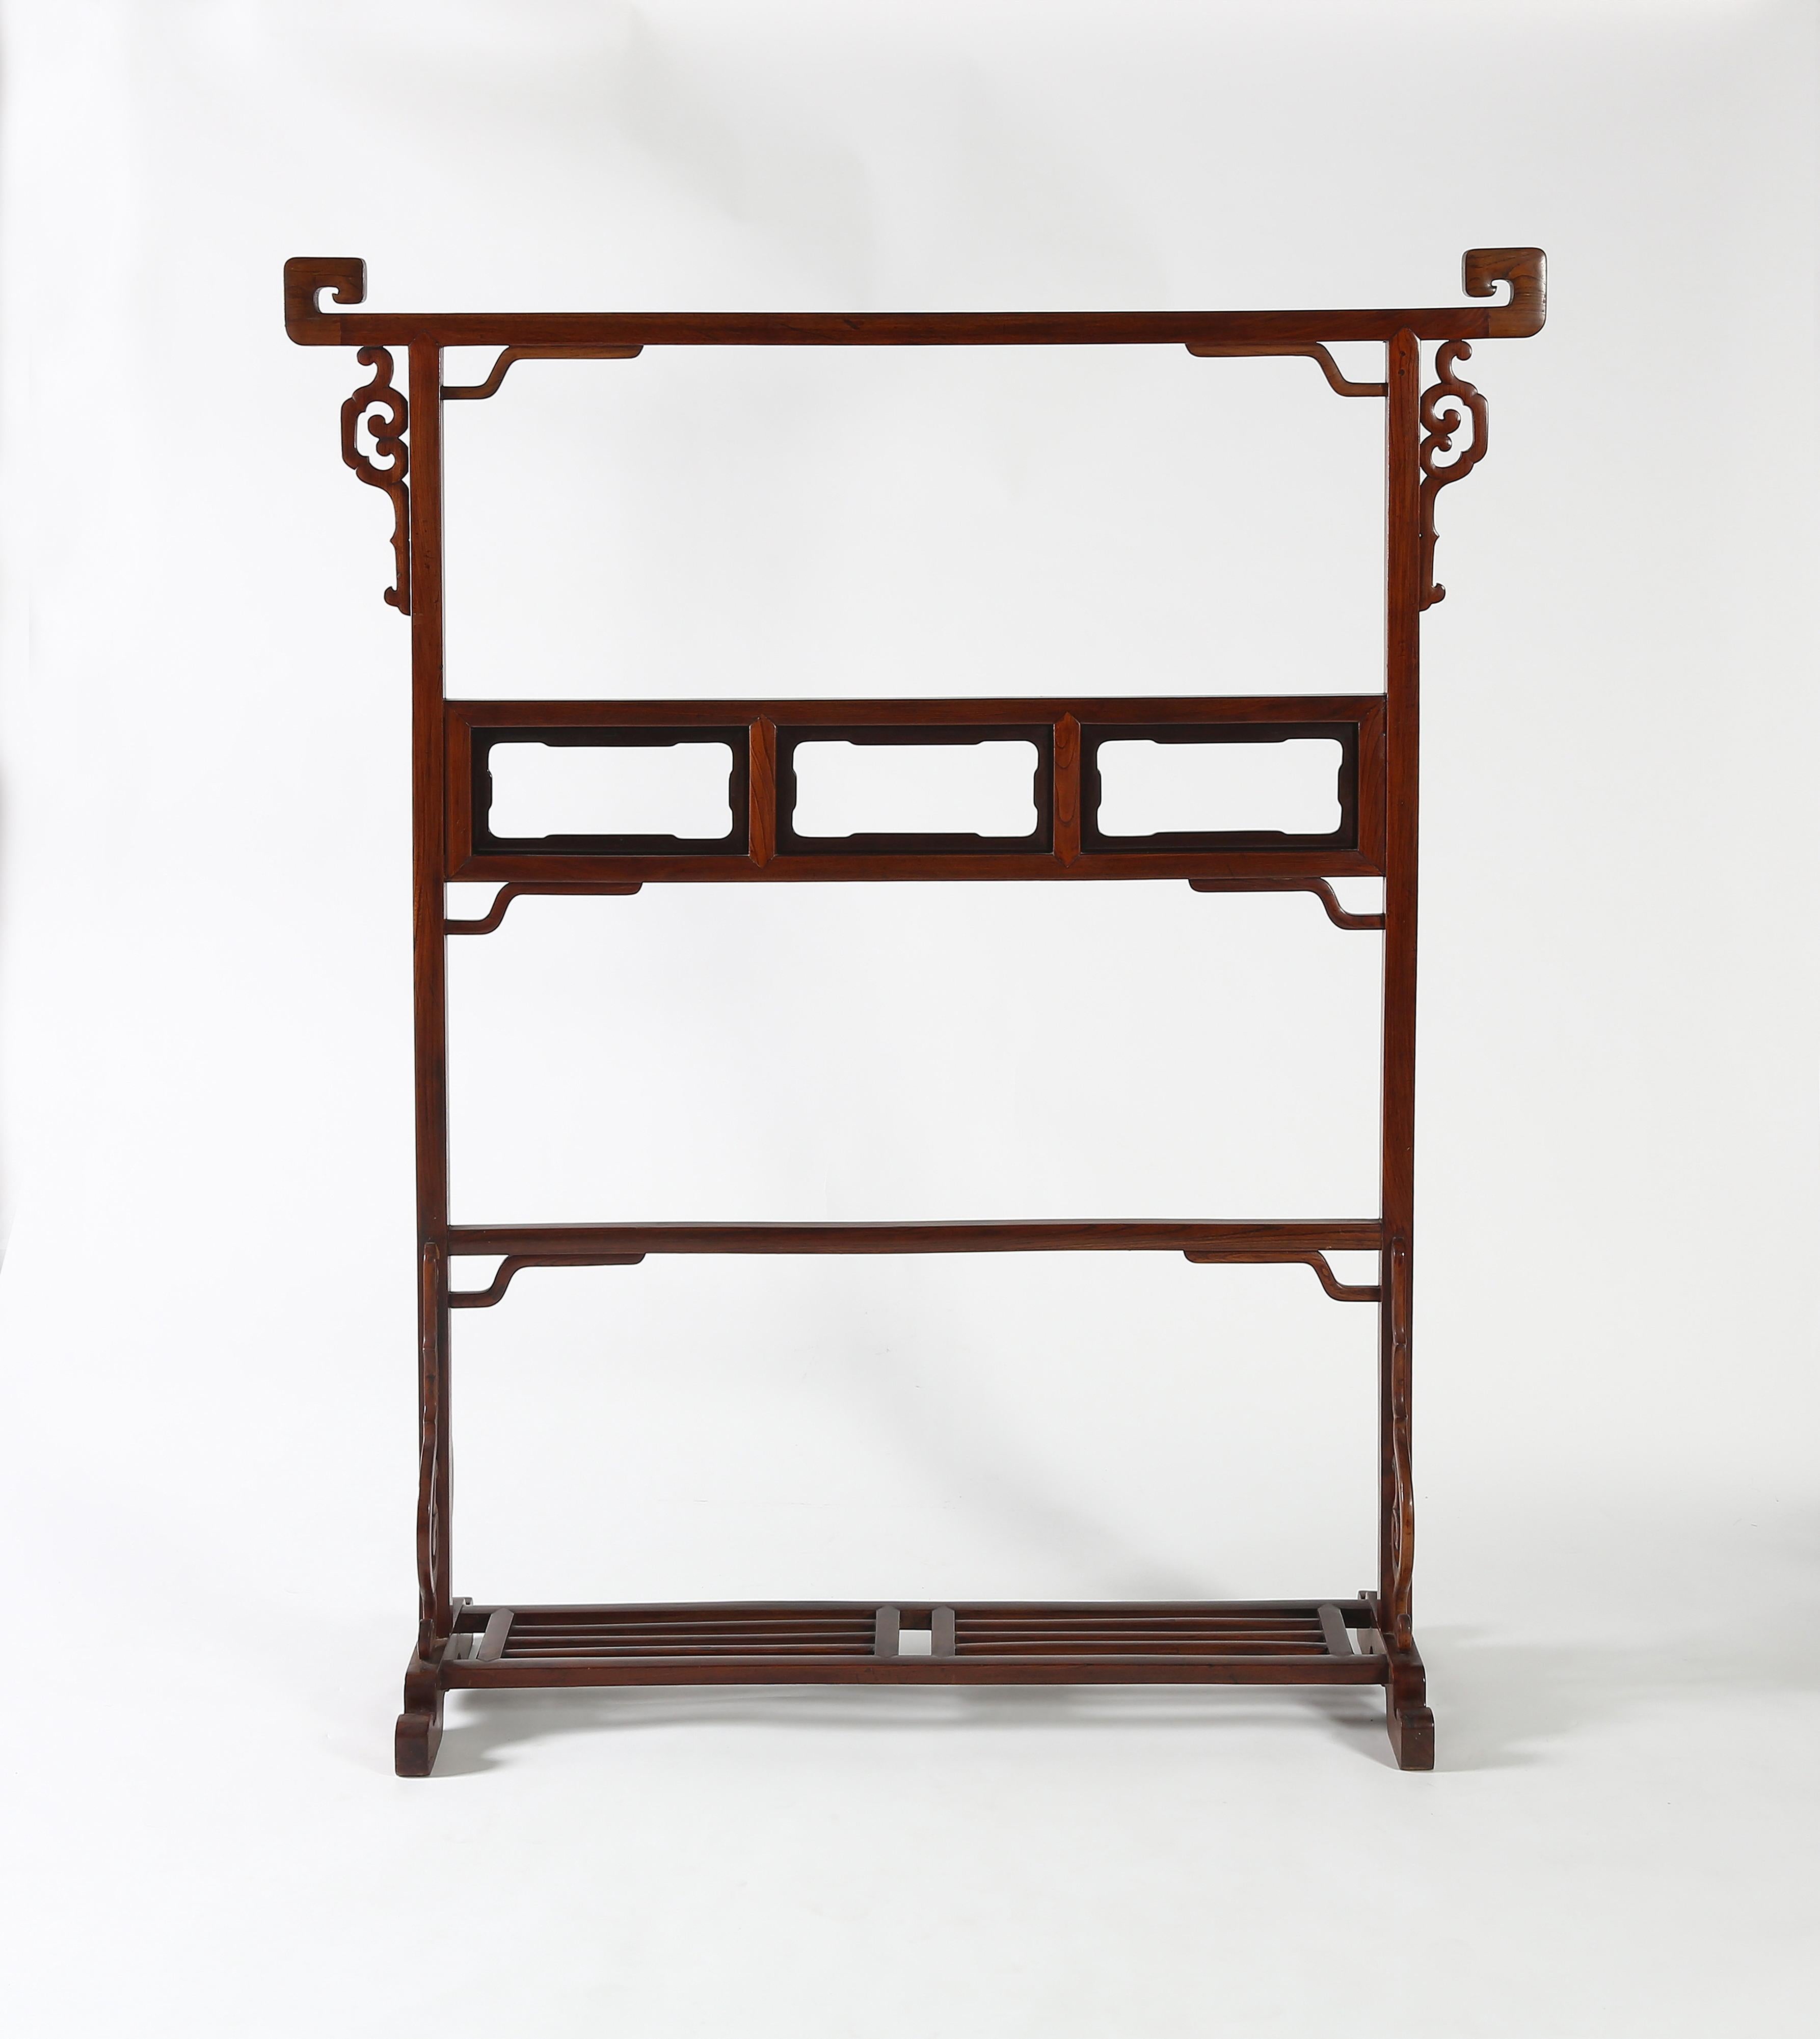 FINE CLOTHES RACK
The top rail with scroll ends to prevent the clothing from sliding off, supported on side posts decorated with open-carved spandrels, braced with a central panel decorated with open cartouches and a lower stretcher, decorated with